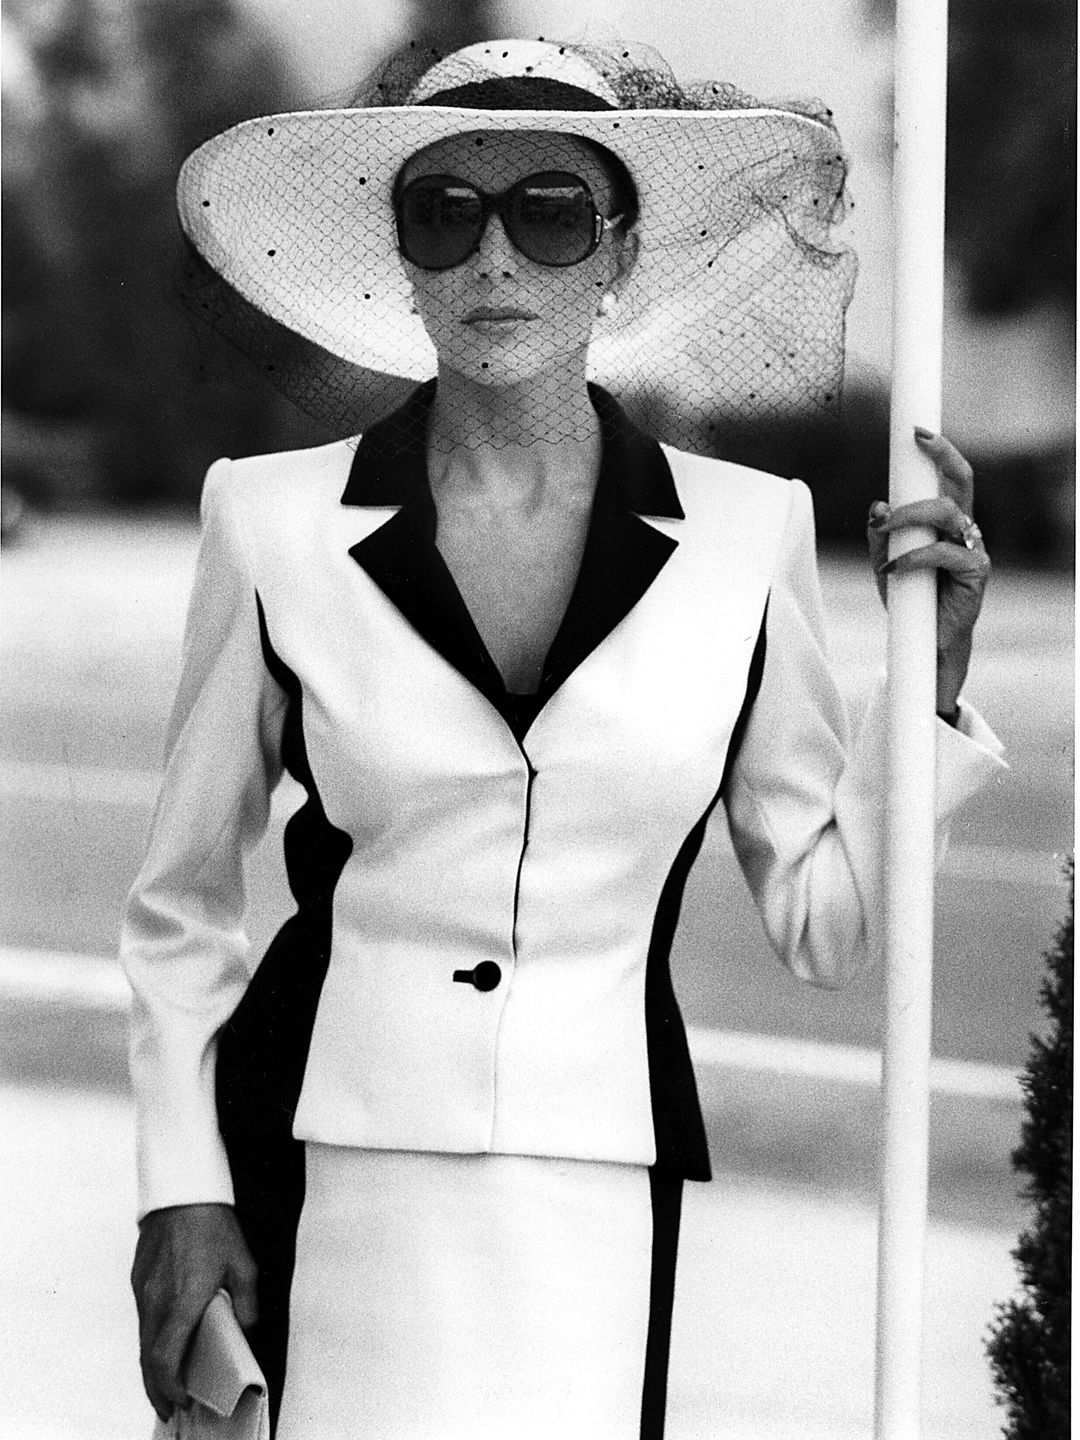 Actress Joan Collins wearing a monochrome Nolan Miller suit as Alexis on the set of Dynasty in 1981